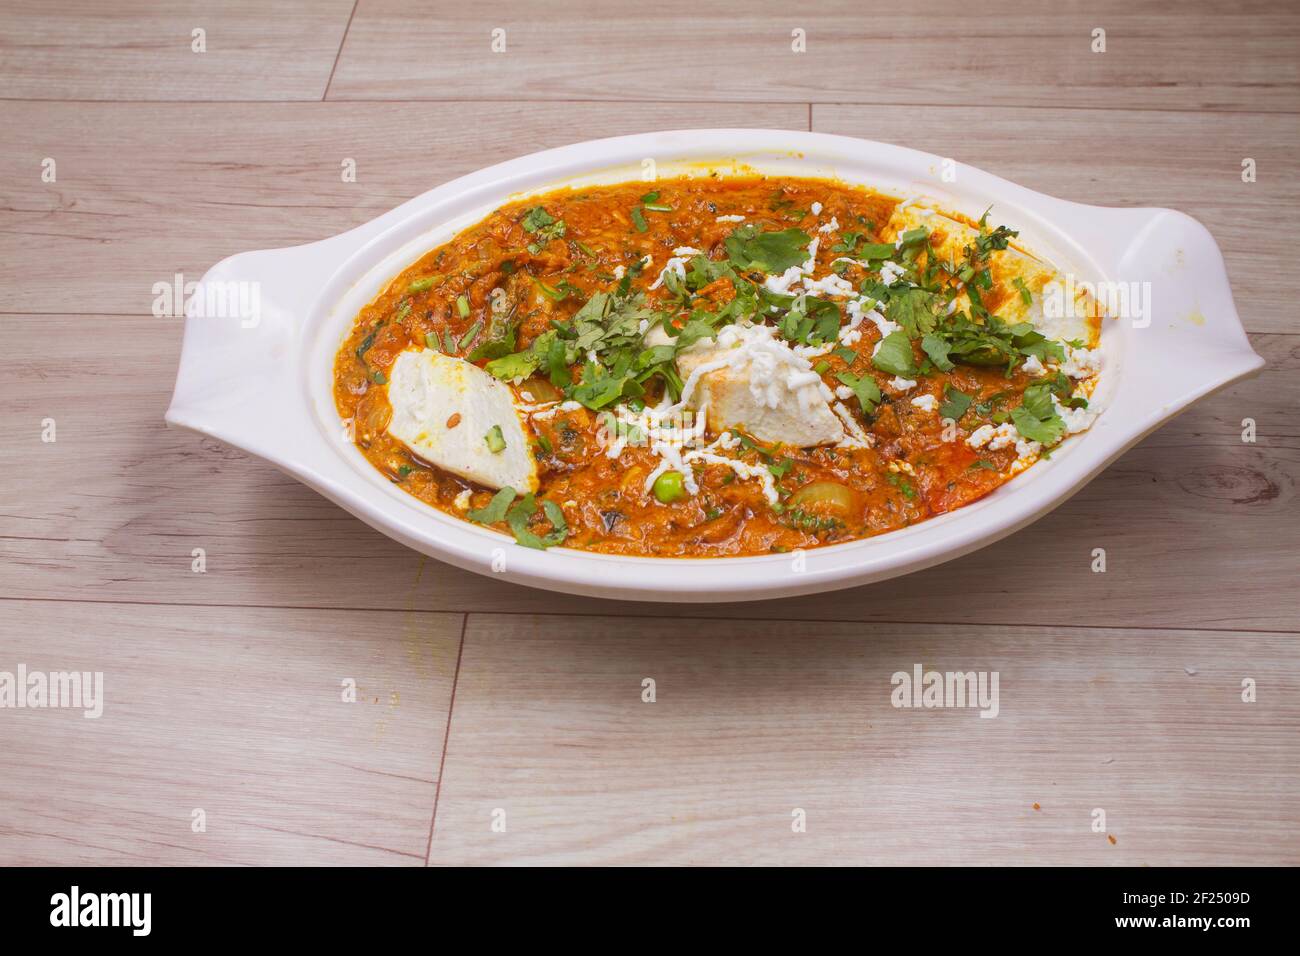 indian dish Paneer masala or paneer lachhedar served in bowl on wooden background Stock Photo